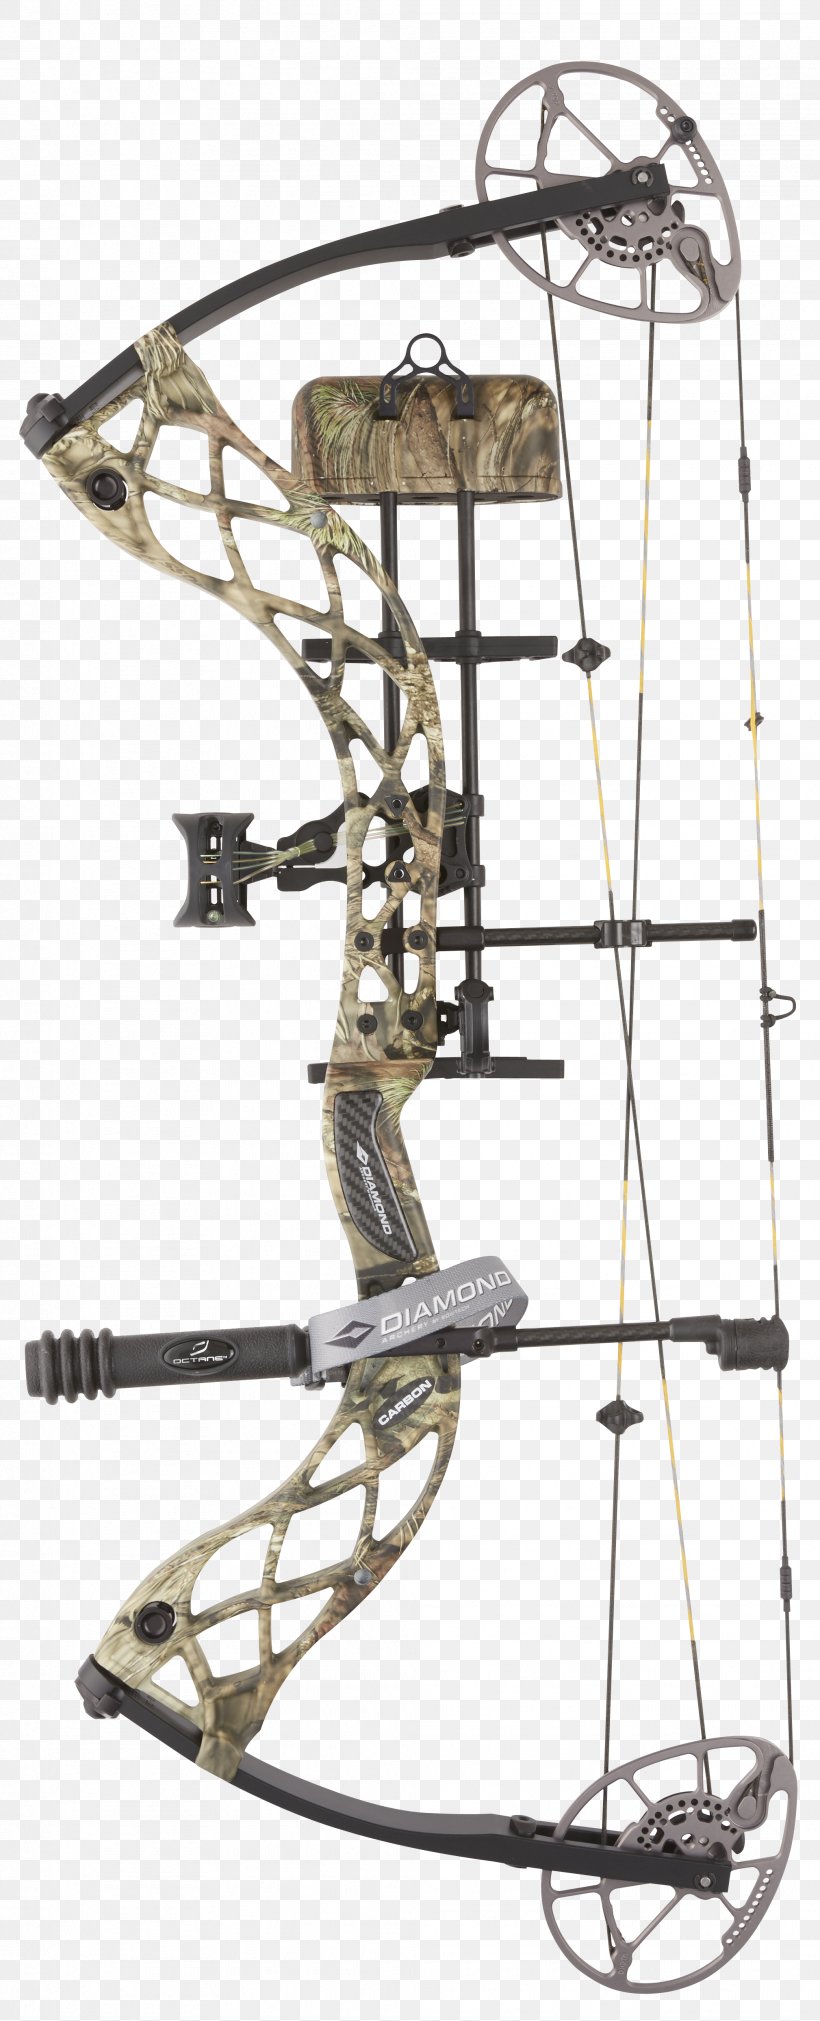 Compound Bows Bow And Arrow Binary Cam Archery Hunting, PNG, 2018x4974px, Compound Bows, Archery, Binary Cam, Bow, Bow And Arrow Download Free